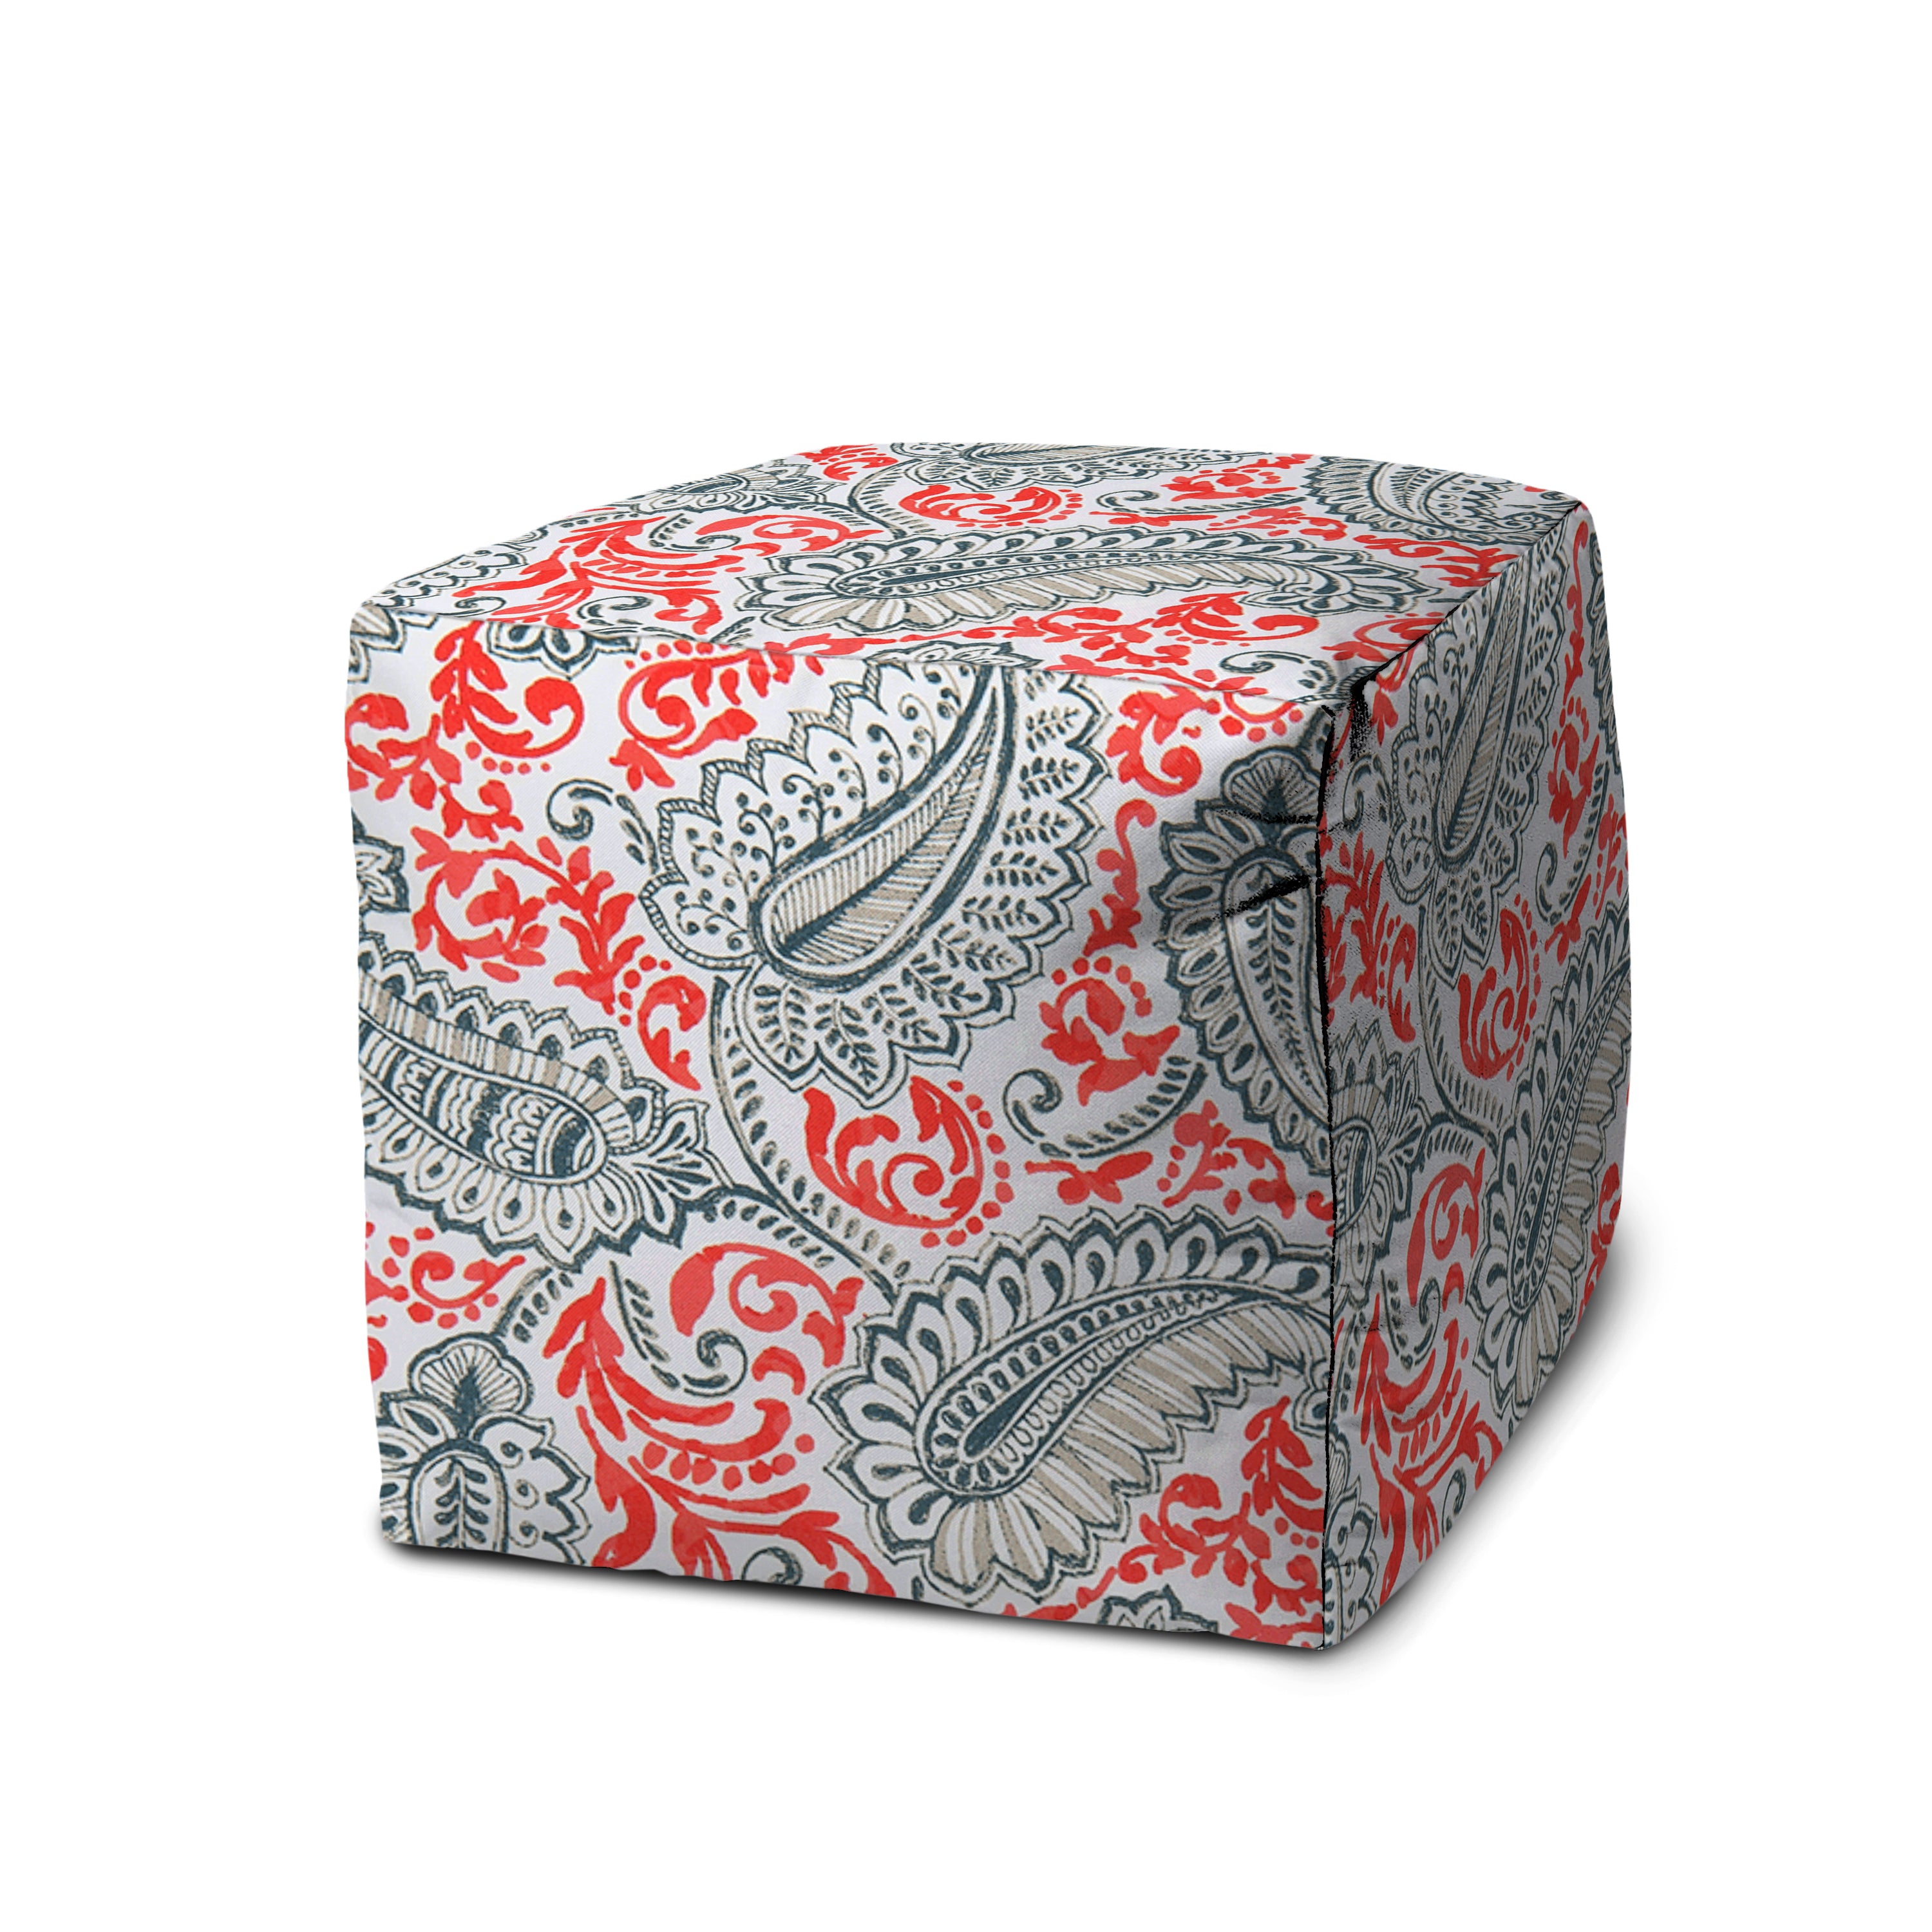 Coral Indoor/Outdoor Pouf - Zipper Cover Only - 17 x 17 Cube